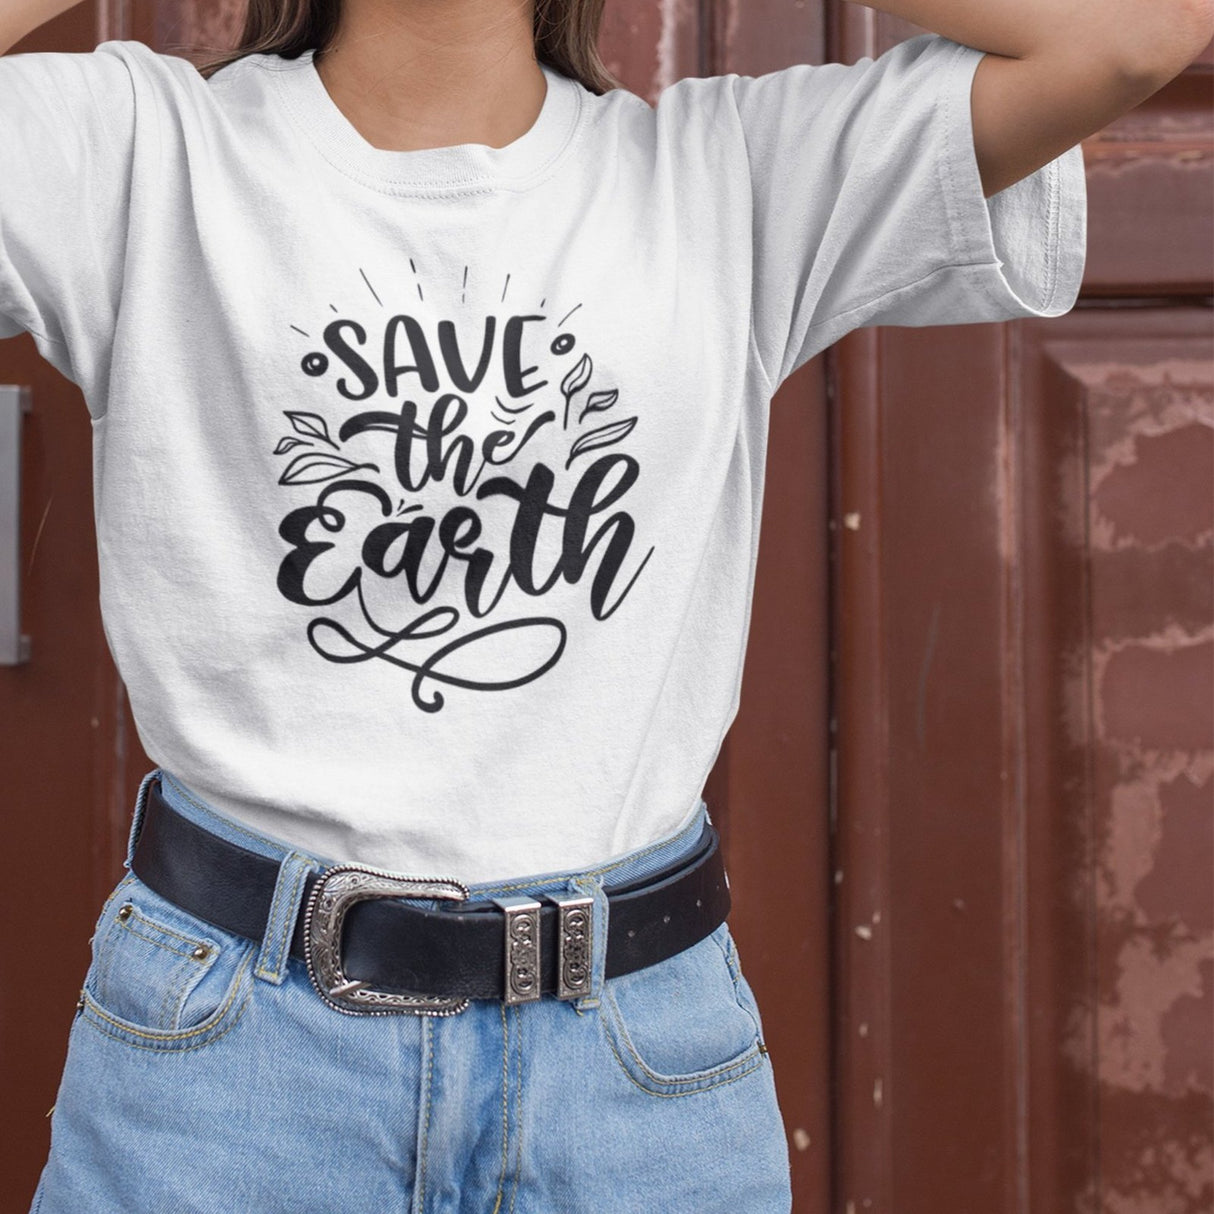 save-the-earth-earth-tee-nature-t-shirt-save-the-earth-tee-global-warming-t-shirt-earth-day-tee#color_white